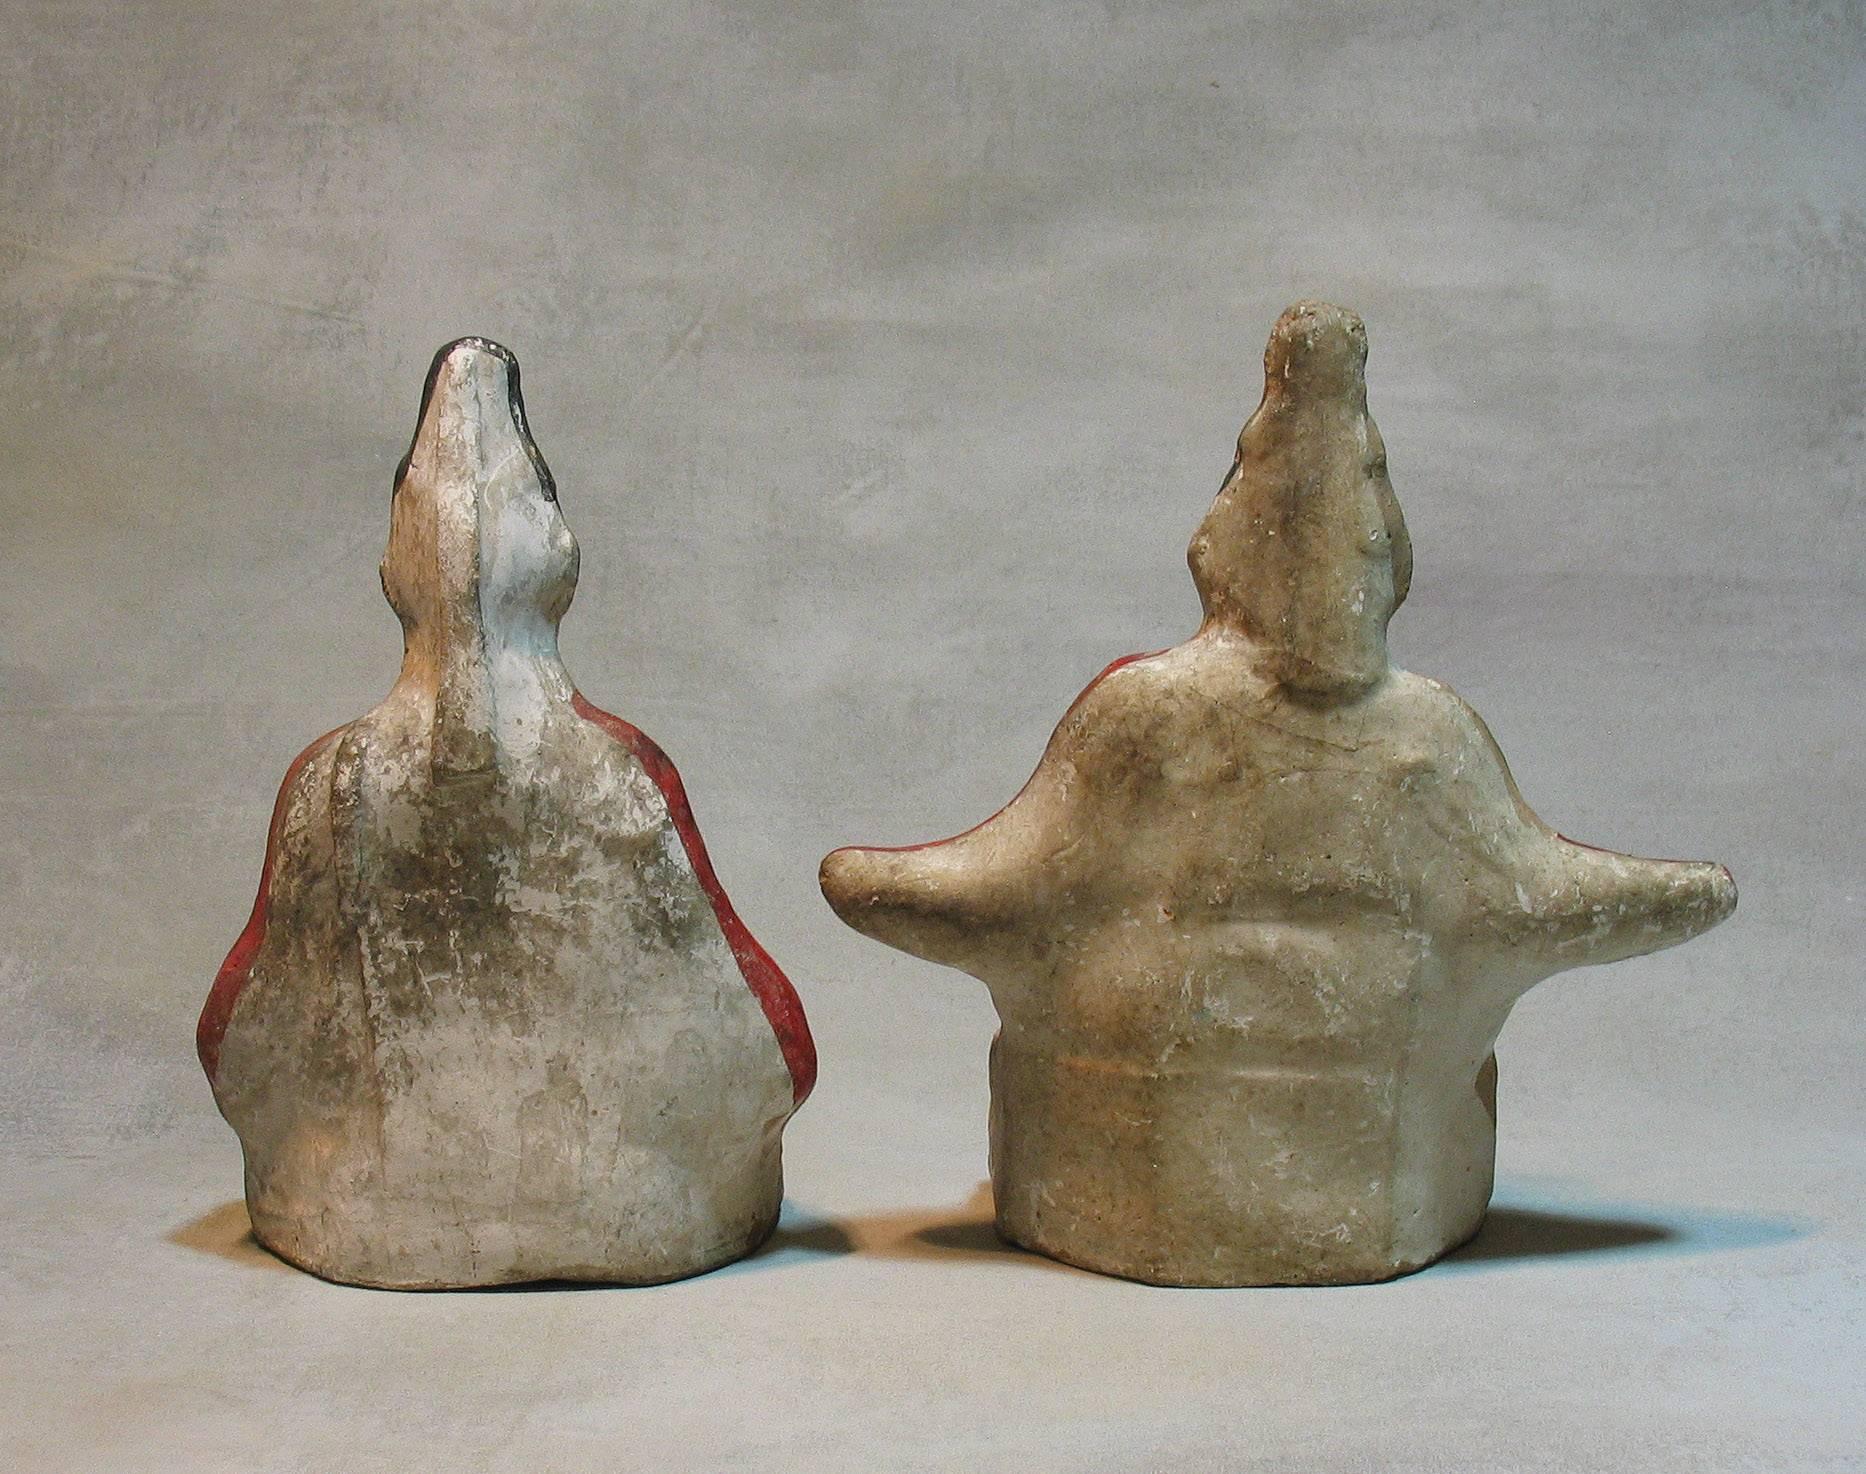 Two rare Japanese Izumo clay dolls of Emperor and Tenjin, Nara Prefecture, Meiji period. Material and simple execution impart a flavor of antiquity and great decorative power. Emperor measures 9 3/4